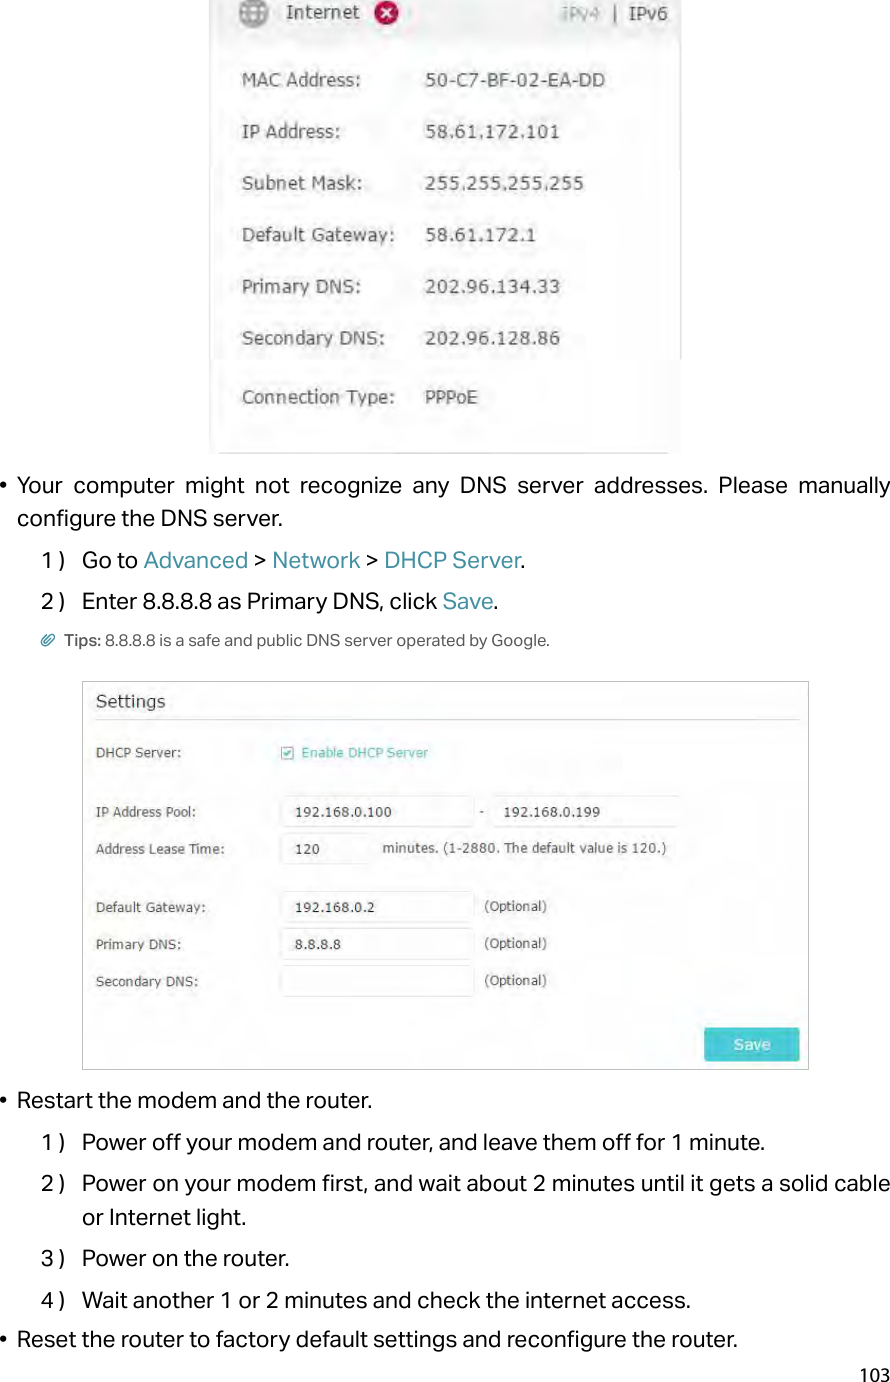 103•  Your computer might not recognize any DNS server addresses. Please manually configure the DNS server.1 )  Go to Advanced &gt; Network &gt; DHCP Server.2 )  Enter 8.8.8.8 as Primary DNS, click Save. Tips: 8.8.8.8 is a safe and public DNS server operated by Google.•  Restart the modem and the router.1 )  Power off your modem and router, and leave them off for 1 minute.2 )  Power on your modem first, and wait about 2 minutes until it gets a solid cable or Internet light.3 )  Power on the router.4 )  Wait another 1 or 2 minutes and check the internet access.•  Reset the router to factory default settings and reconfigure the router.